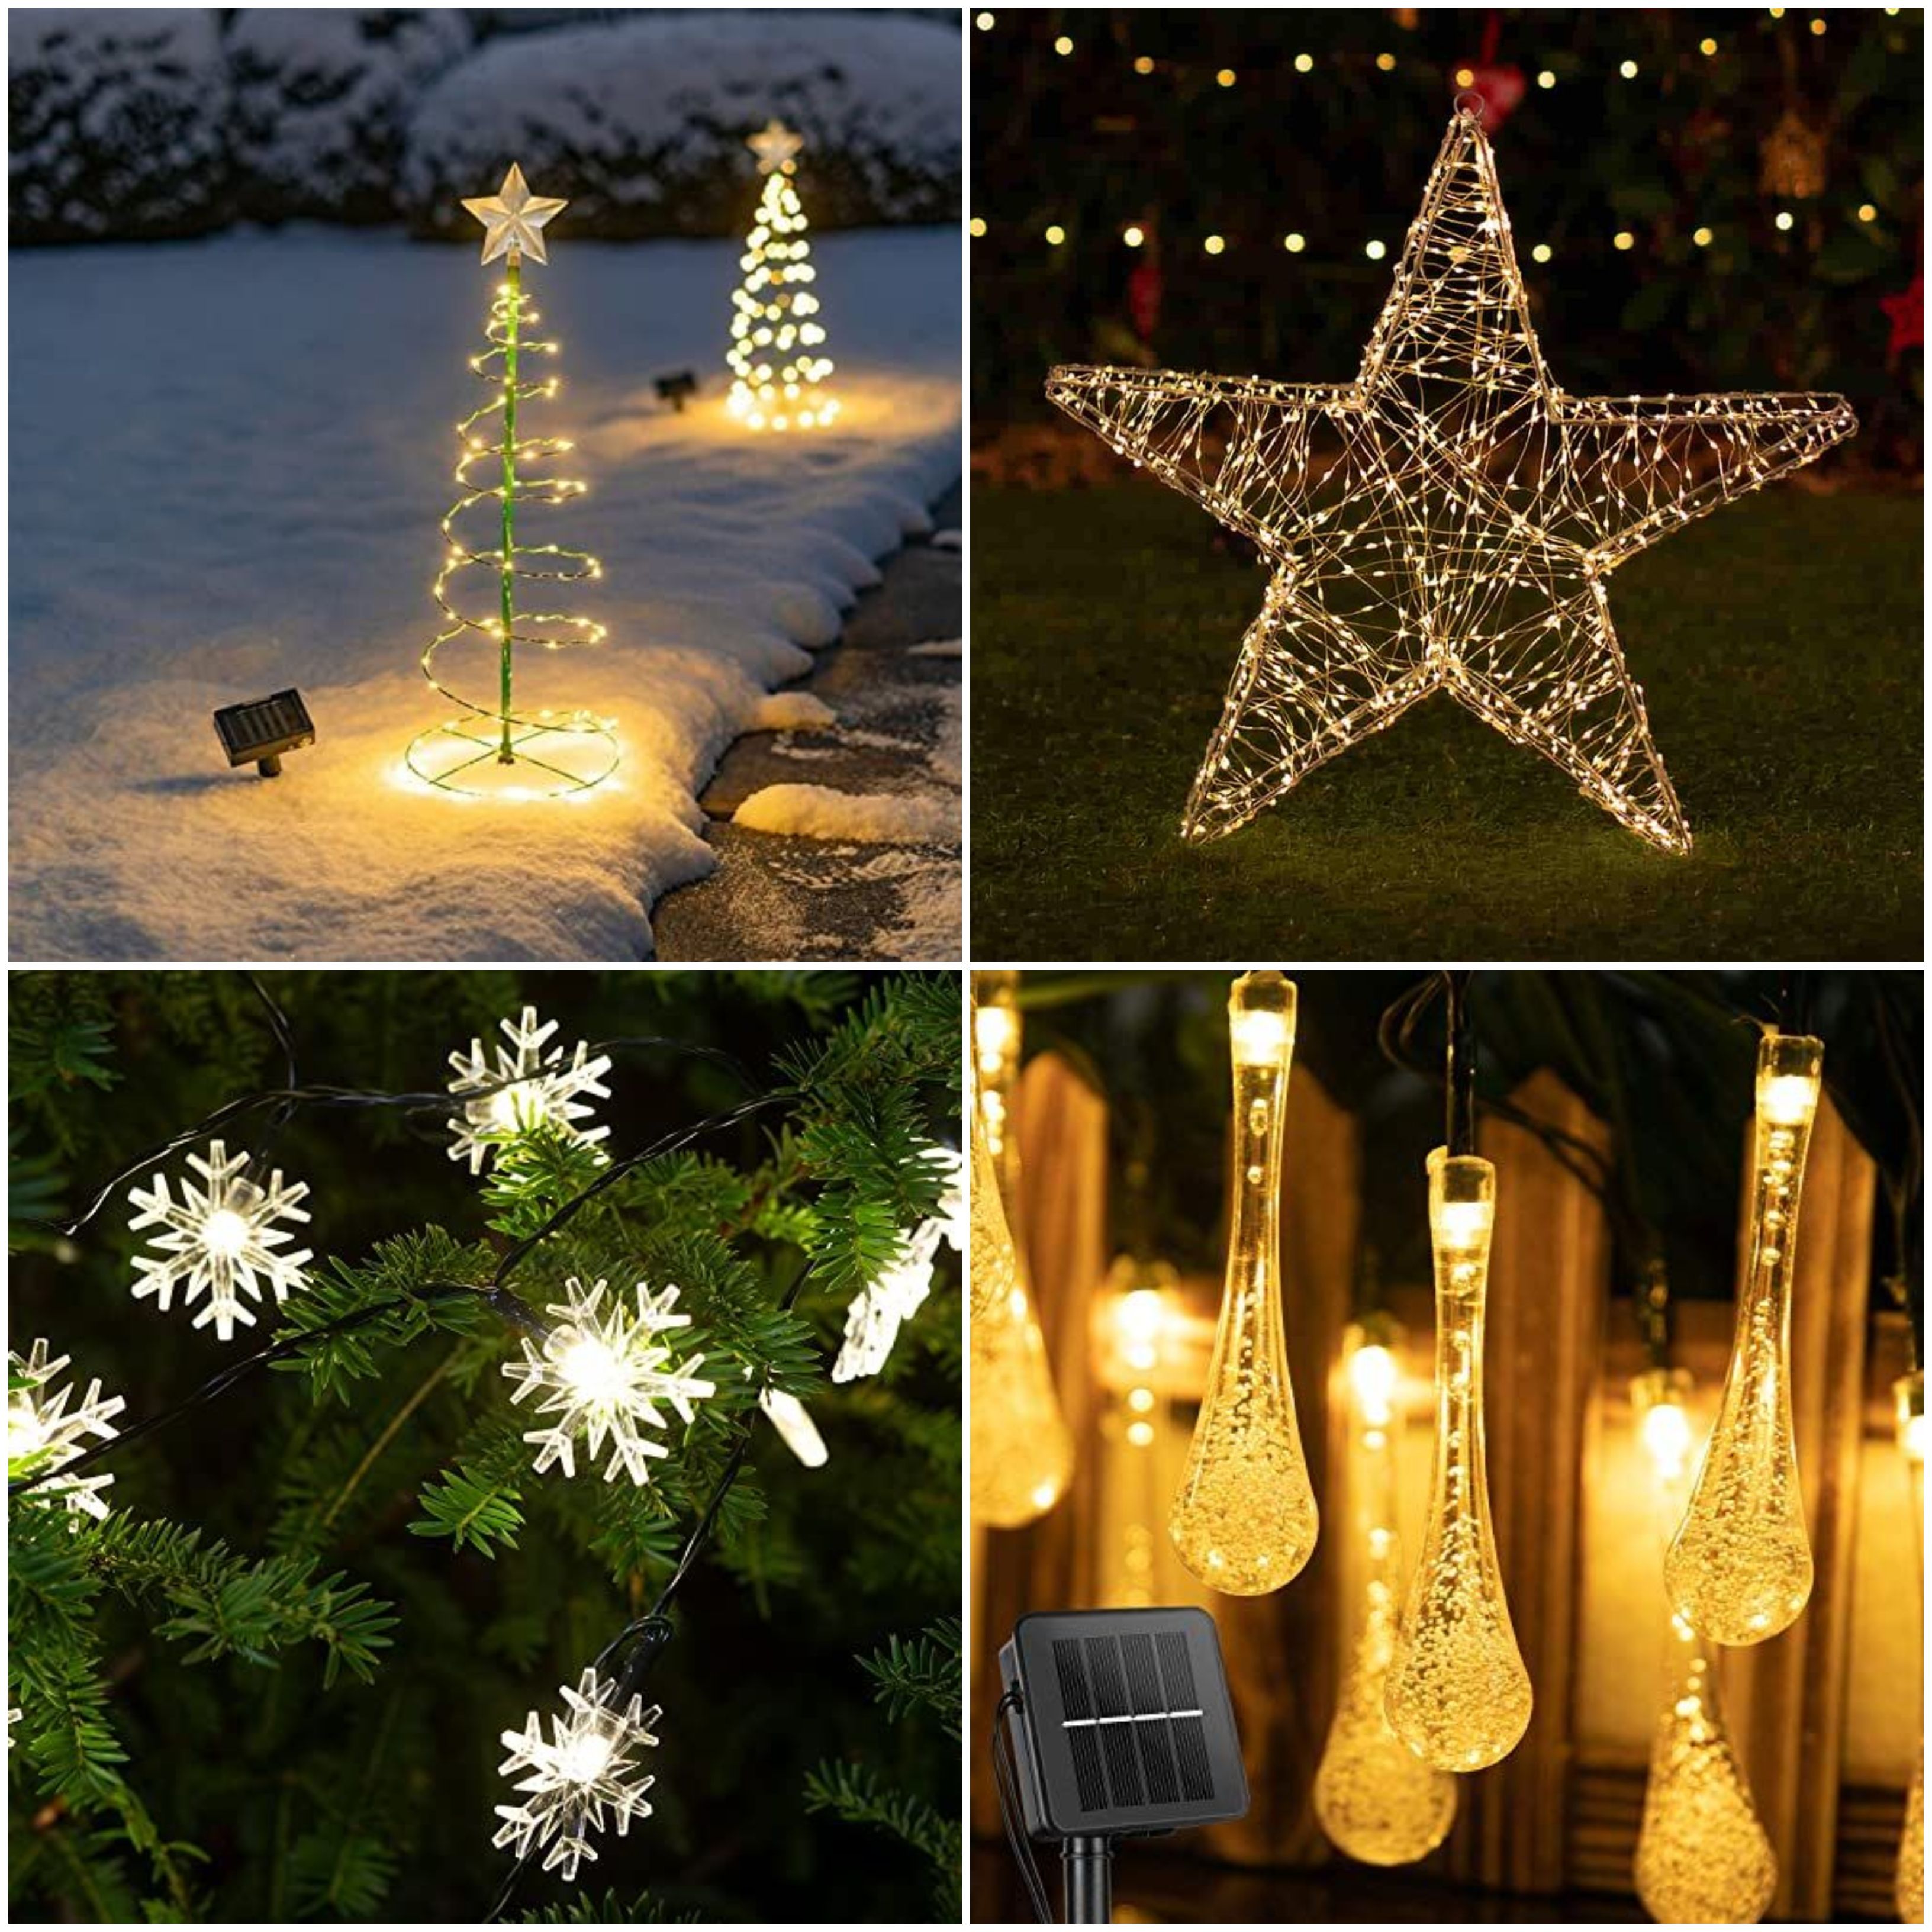 600 LED/960 LED COOL WHITE SNOWING ICICLE CHRISTMAS LIGHTS 8 FUNCTIONS & MEMORY 